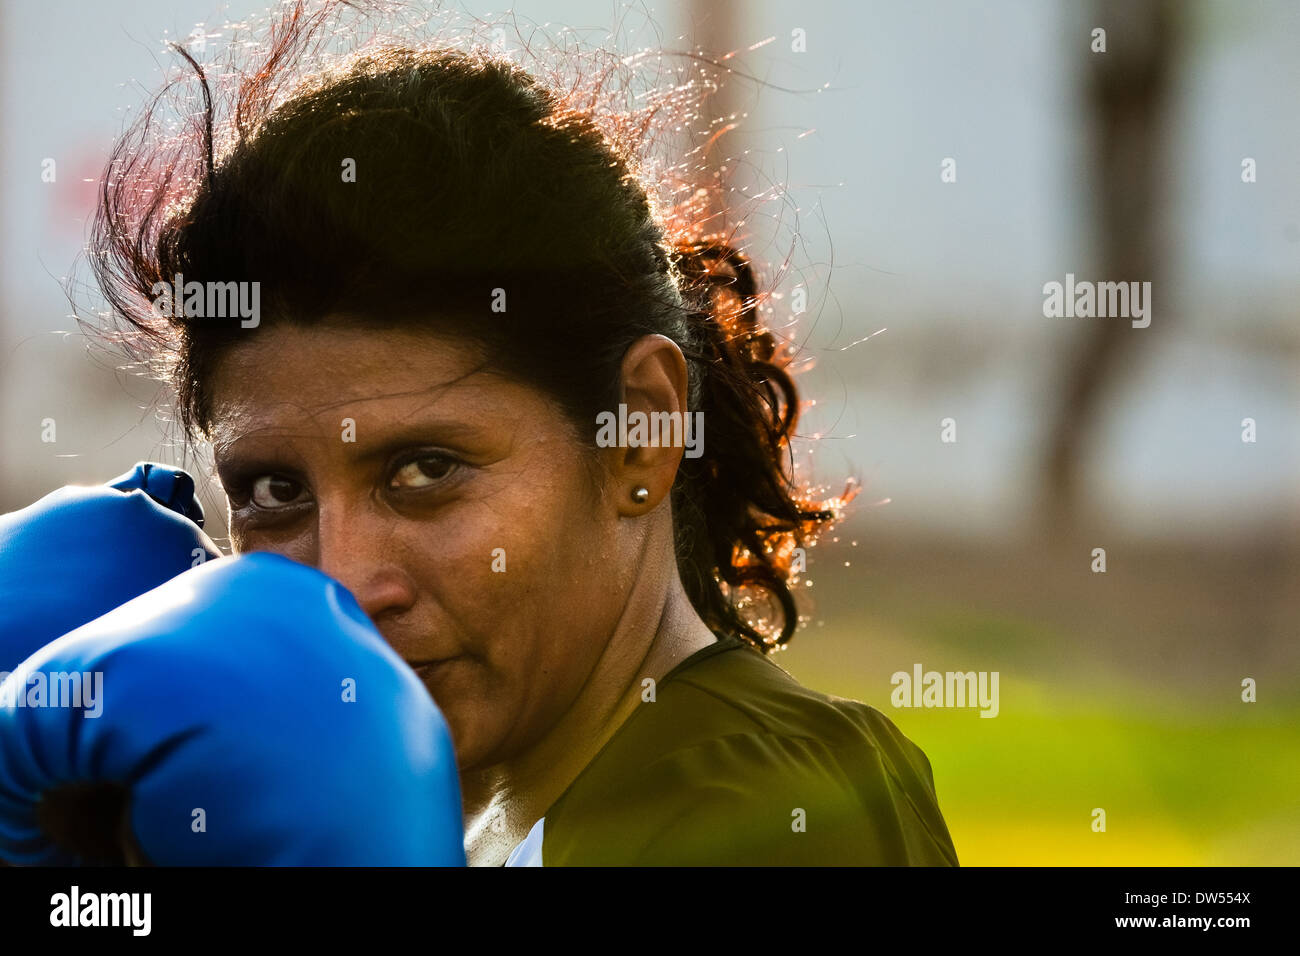 A Peruvian woman practices defense while training in the outdoor boxing school in Callao, Peru. Stock Photo